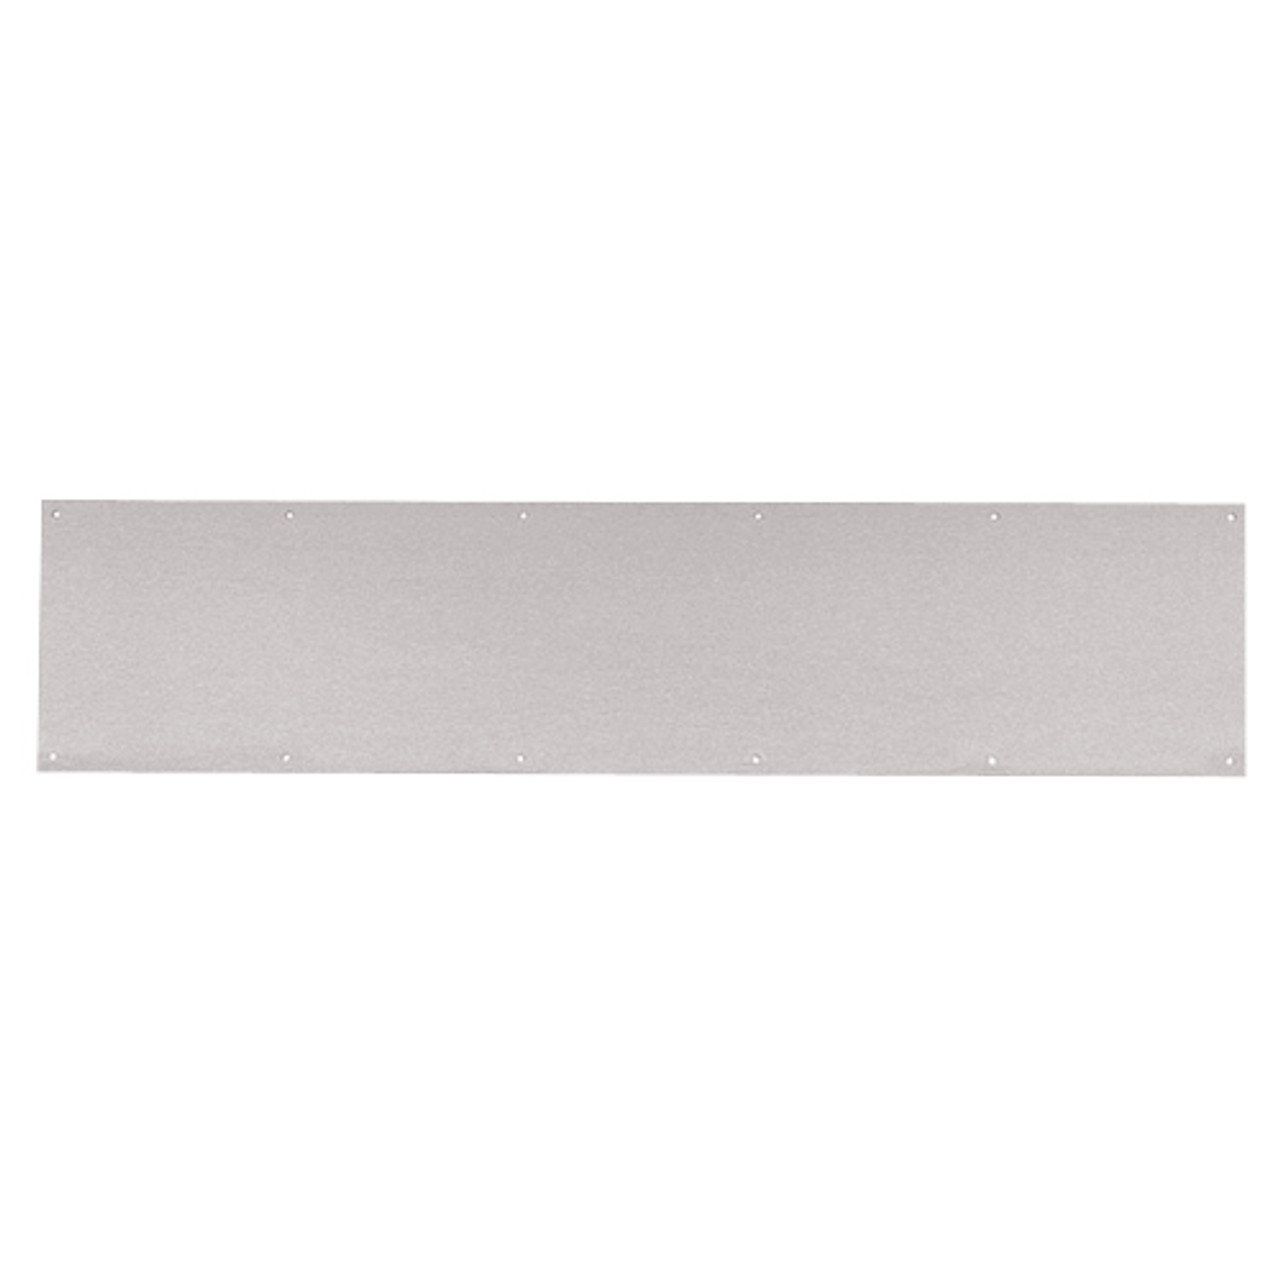 8400-US32D-6x35.5-B-CS Ives 8400 Series Protection Plate in Satin Stainless Steel